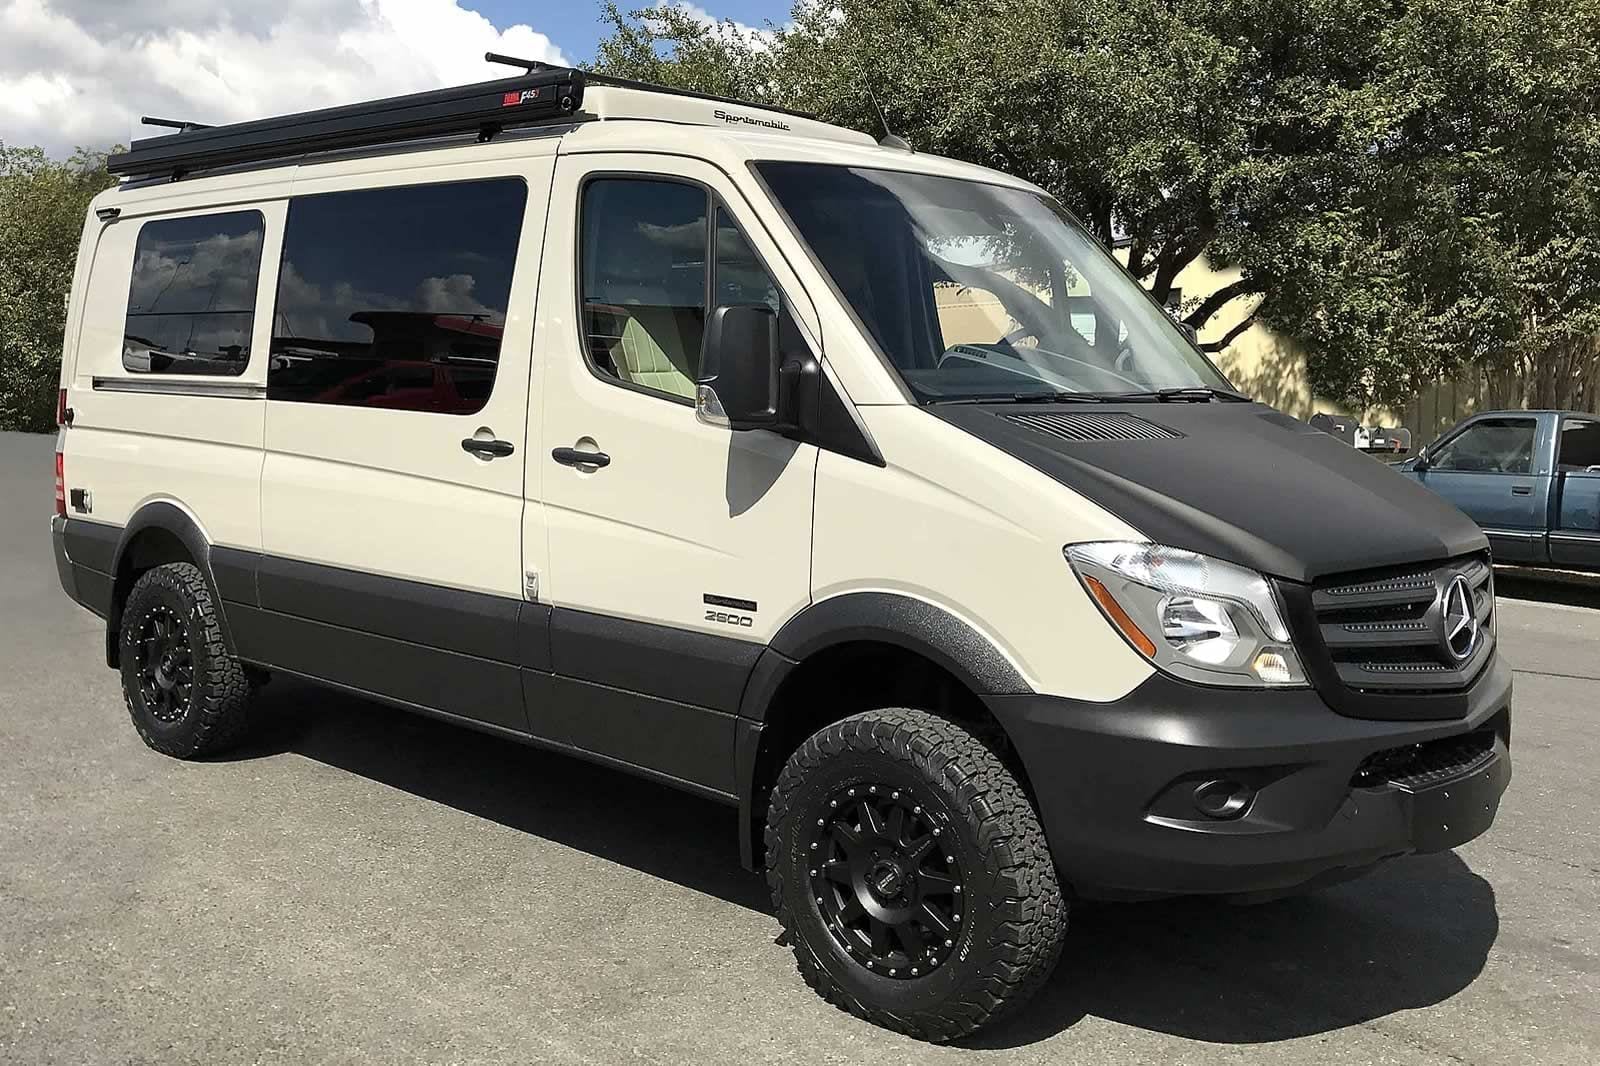 A custom Sportsmobile conversion van with an upgraded exterior rocker panel coating.